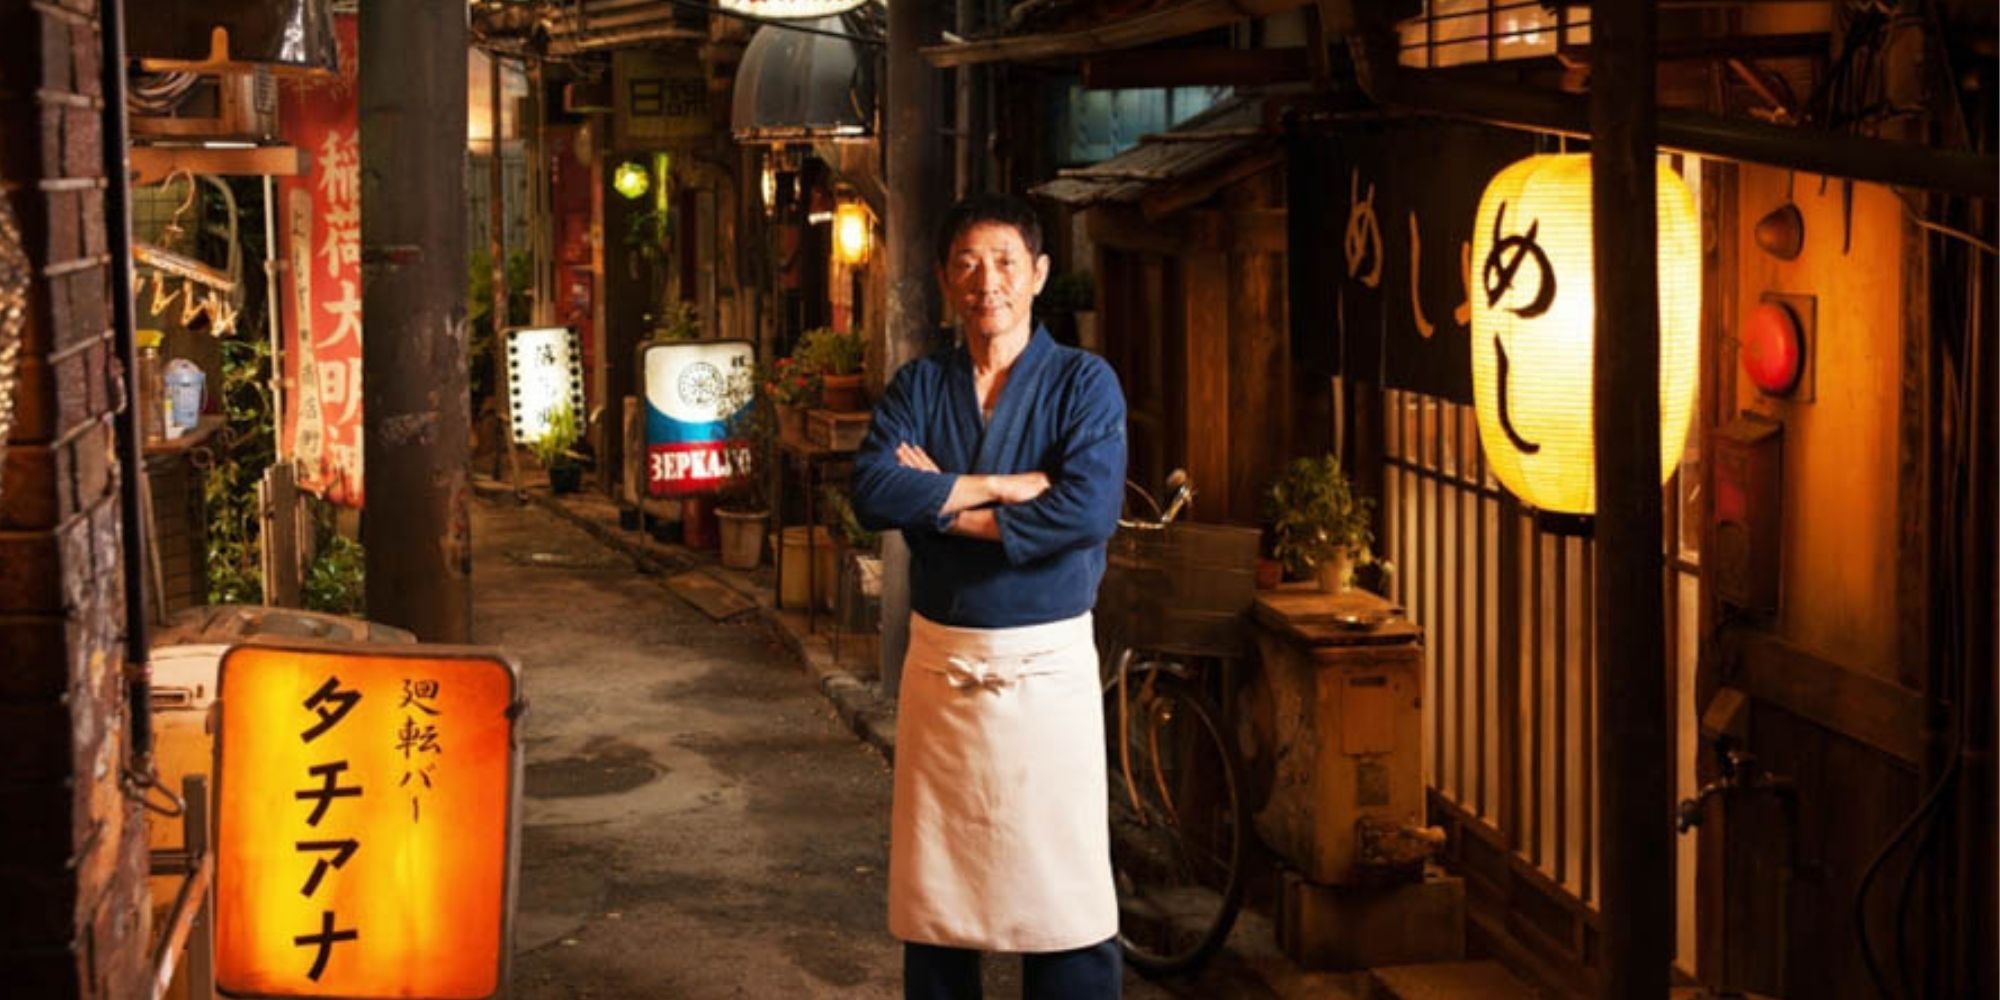 Kaoru Kobayashi as The Master standing in front of his restaurant in Japan in Midnight Diner.